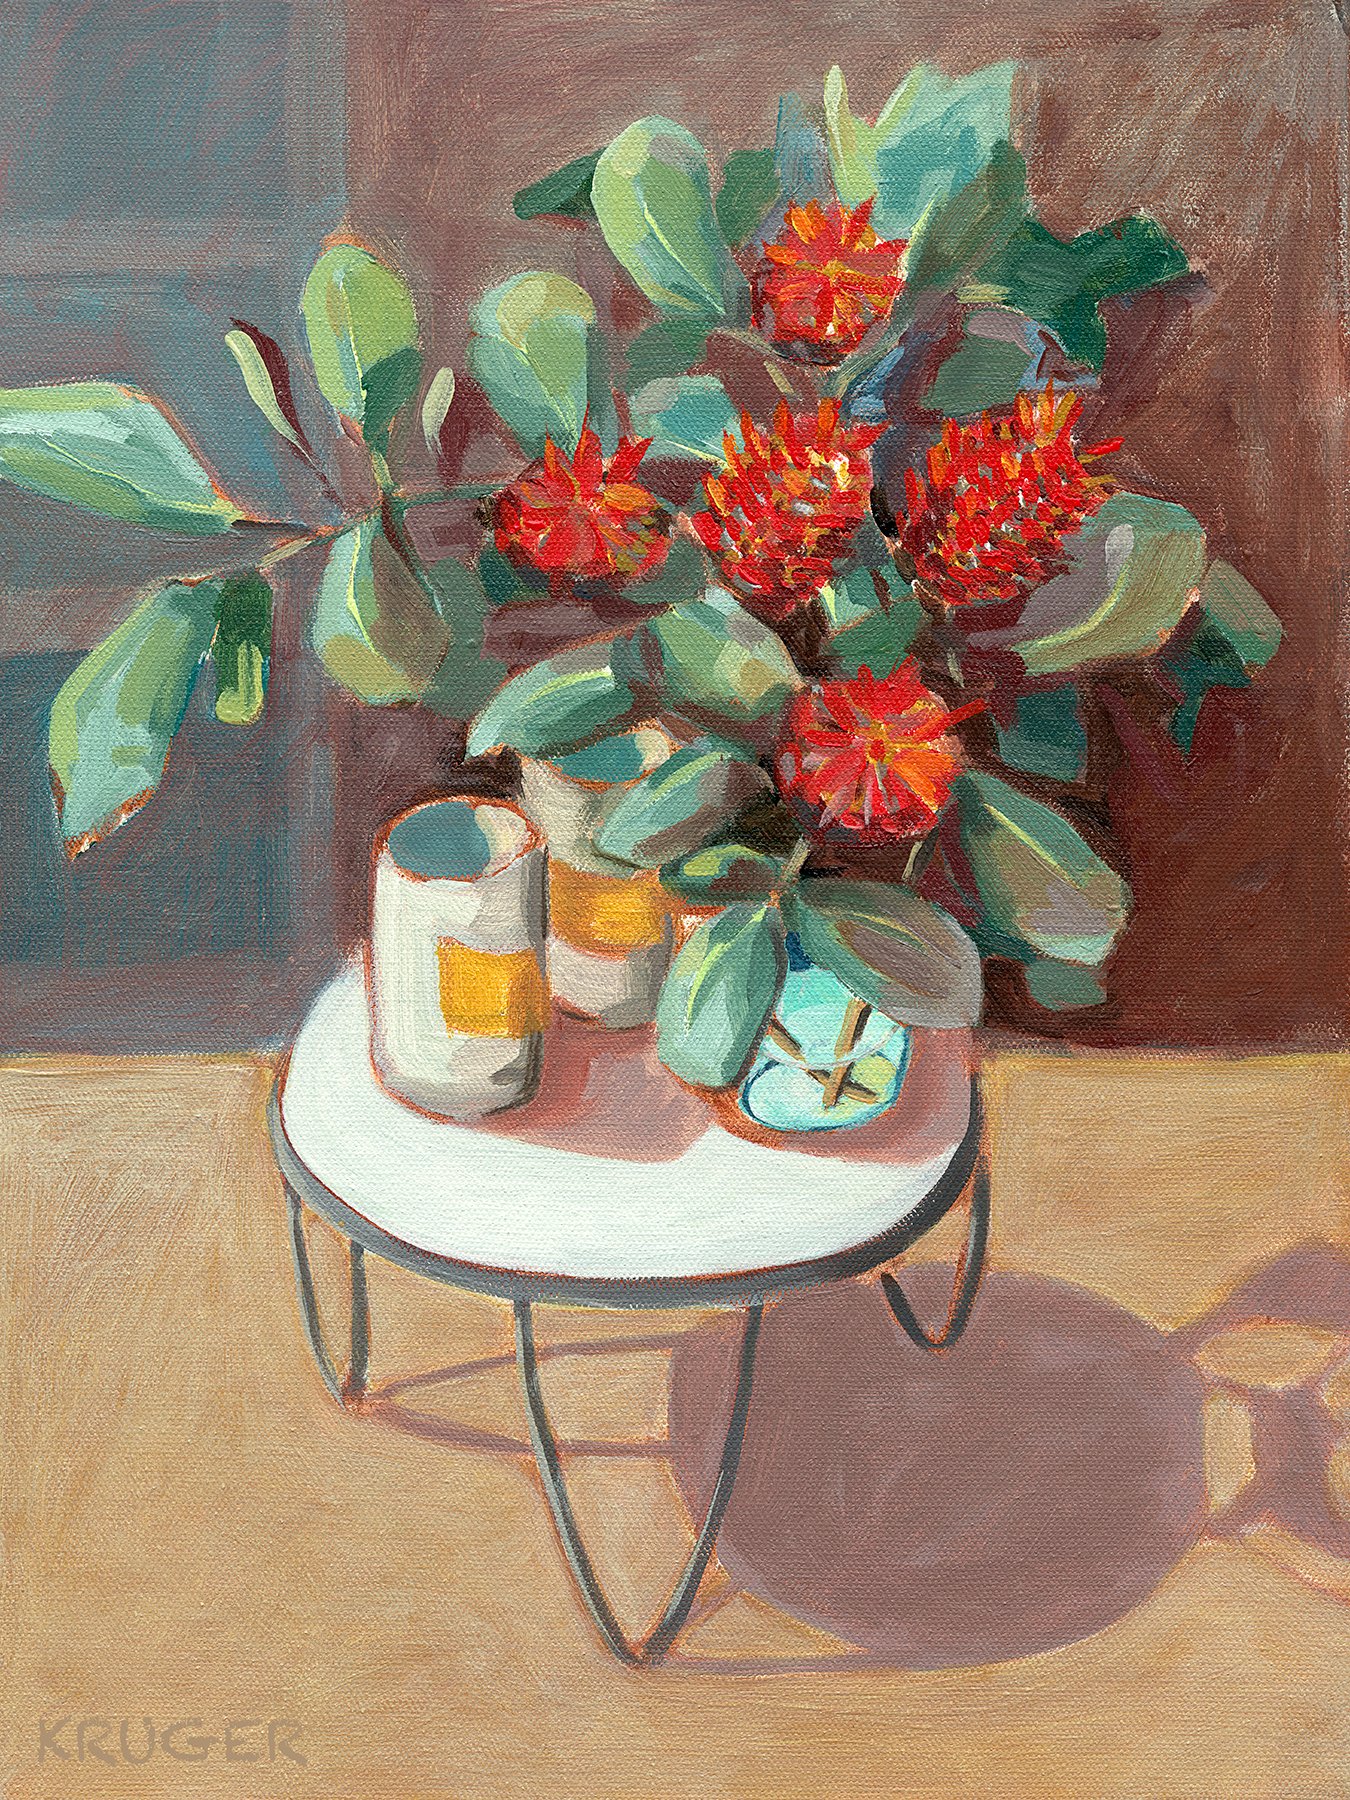  “Foraged flowers on white table”, acrylic on canvas, 43 x 33cm 